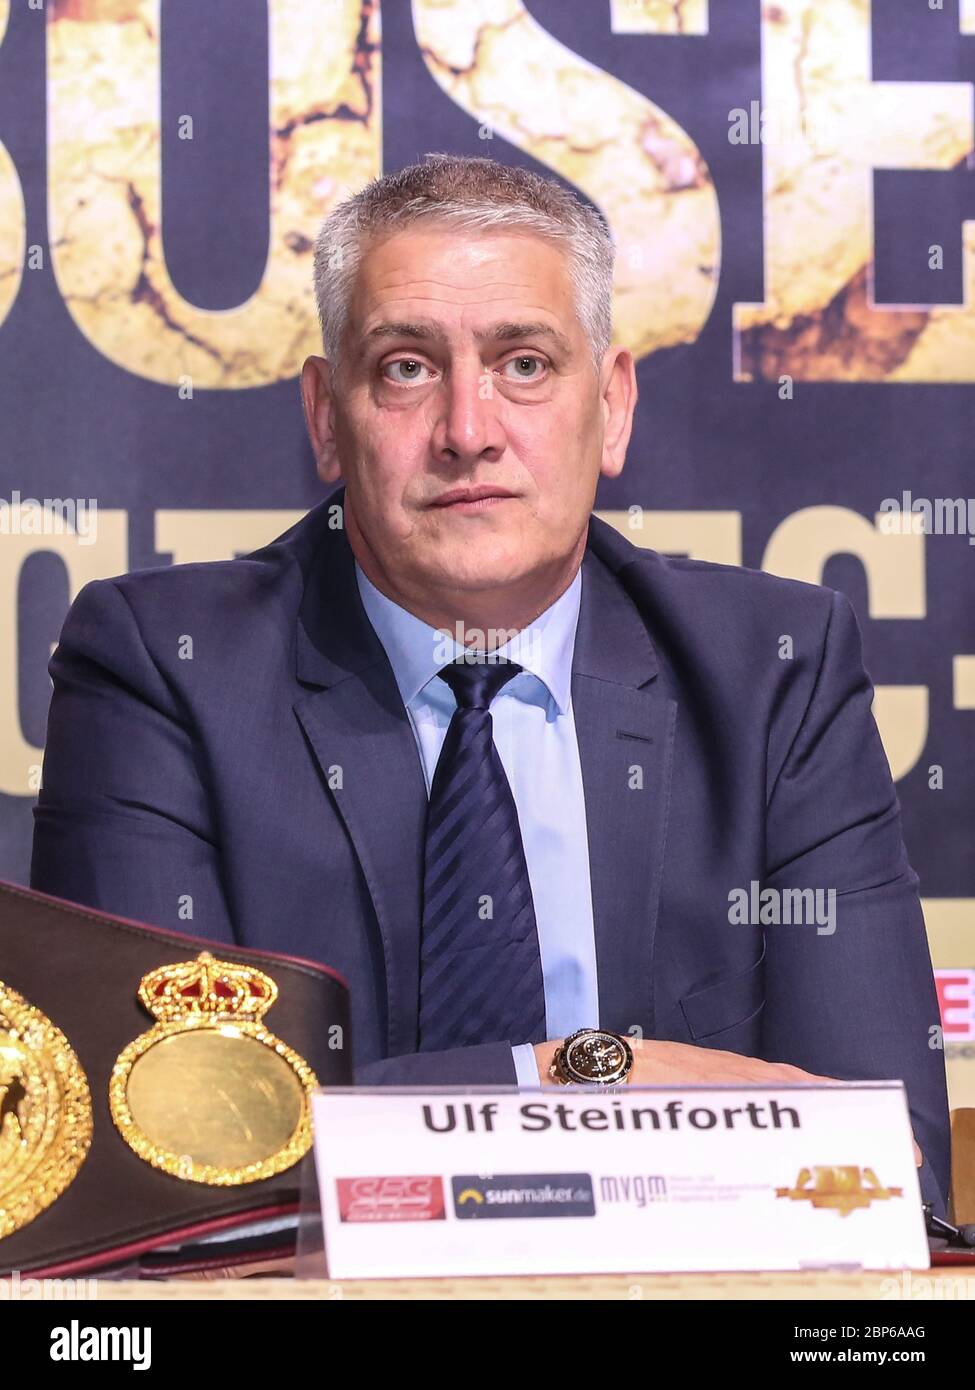 Boxing promoter Ulf Steinforth SES Boxing press conference boxing gala 28.03.2020 Magdeburg Stock Photo